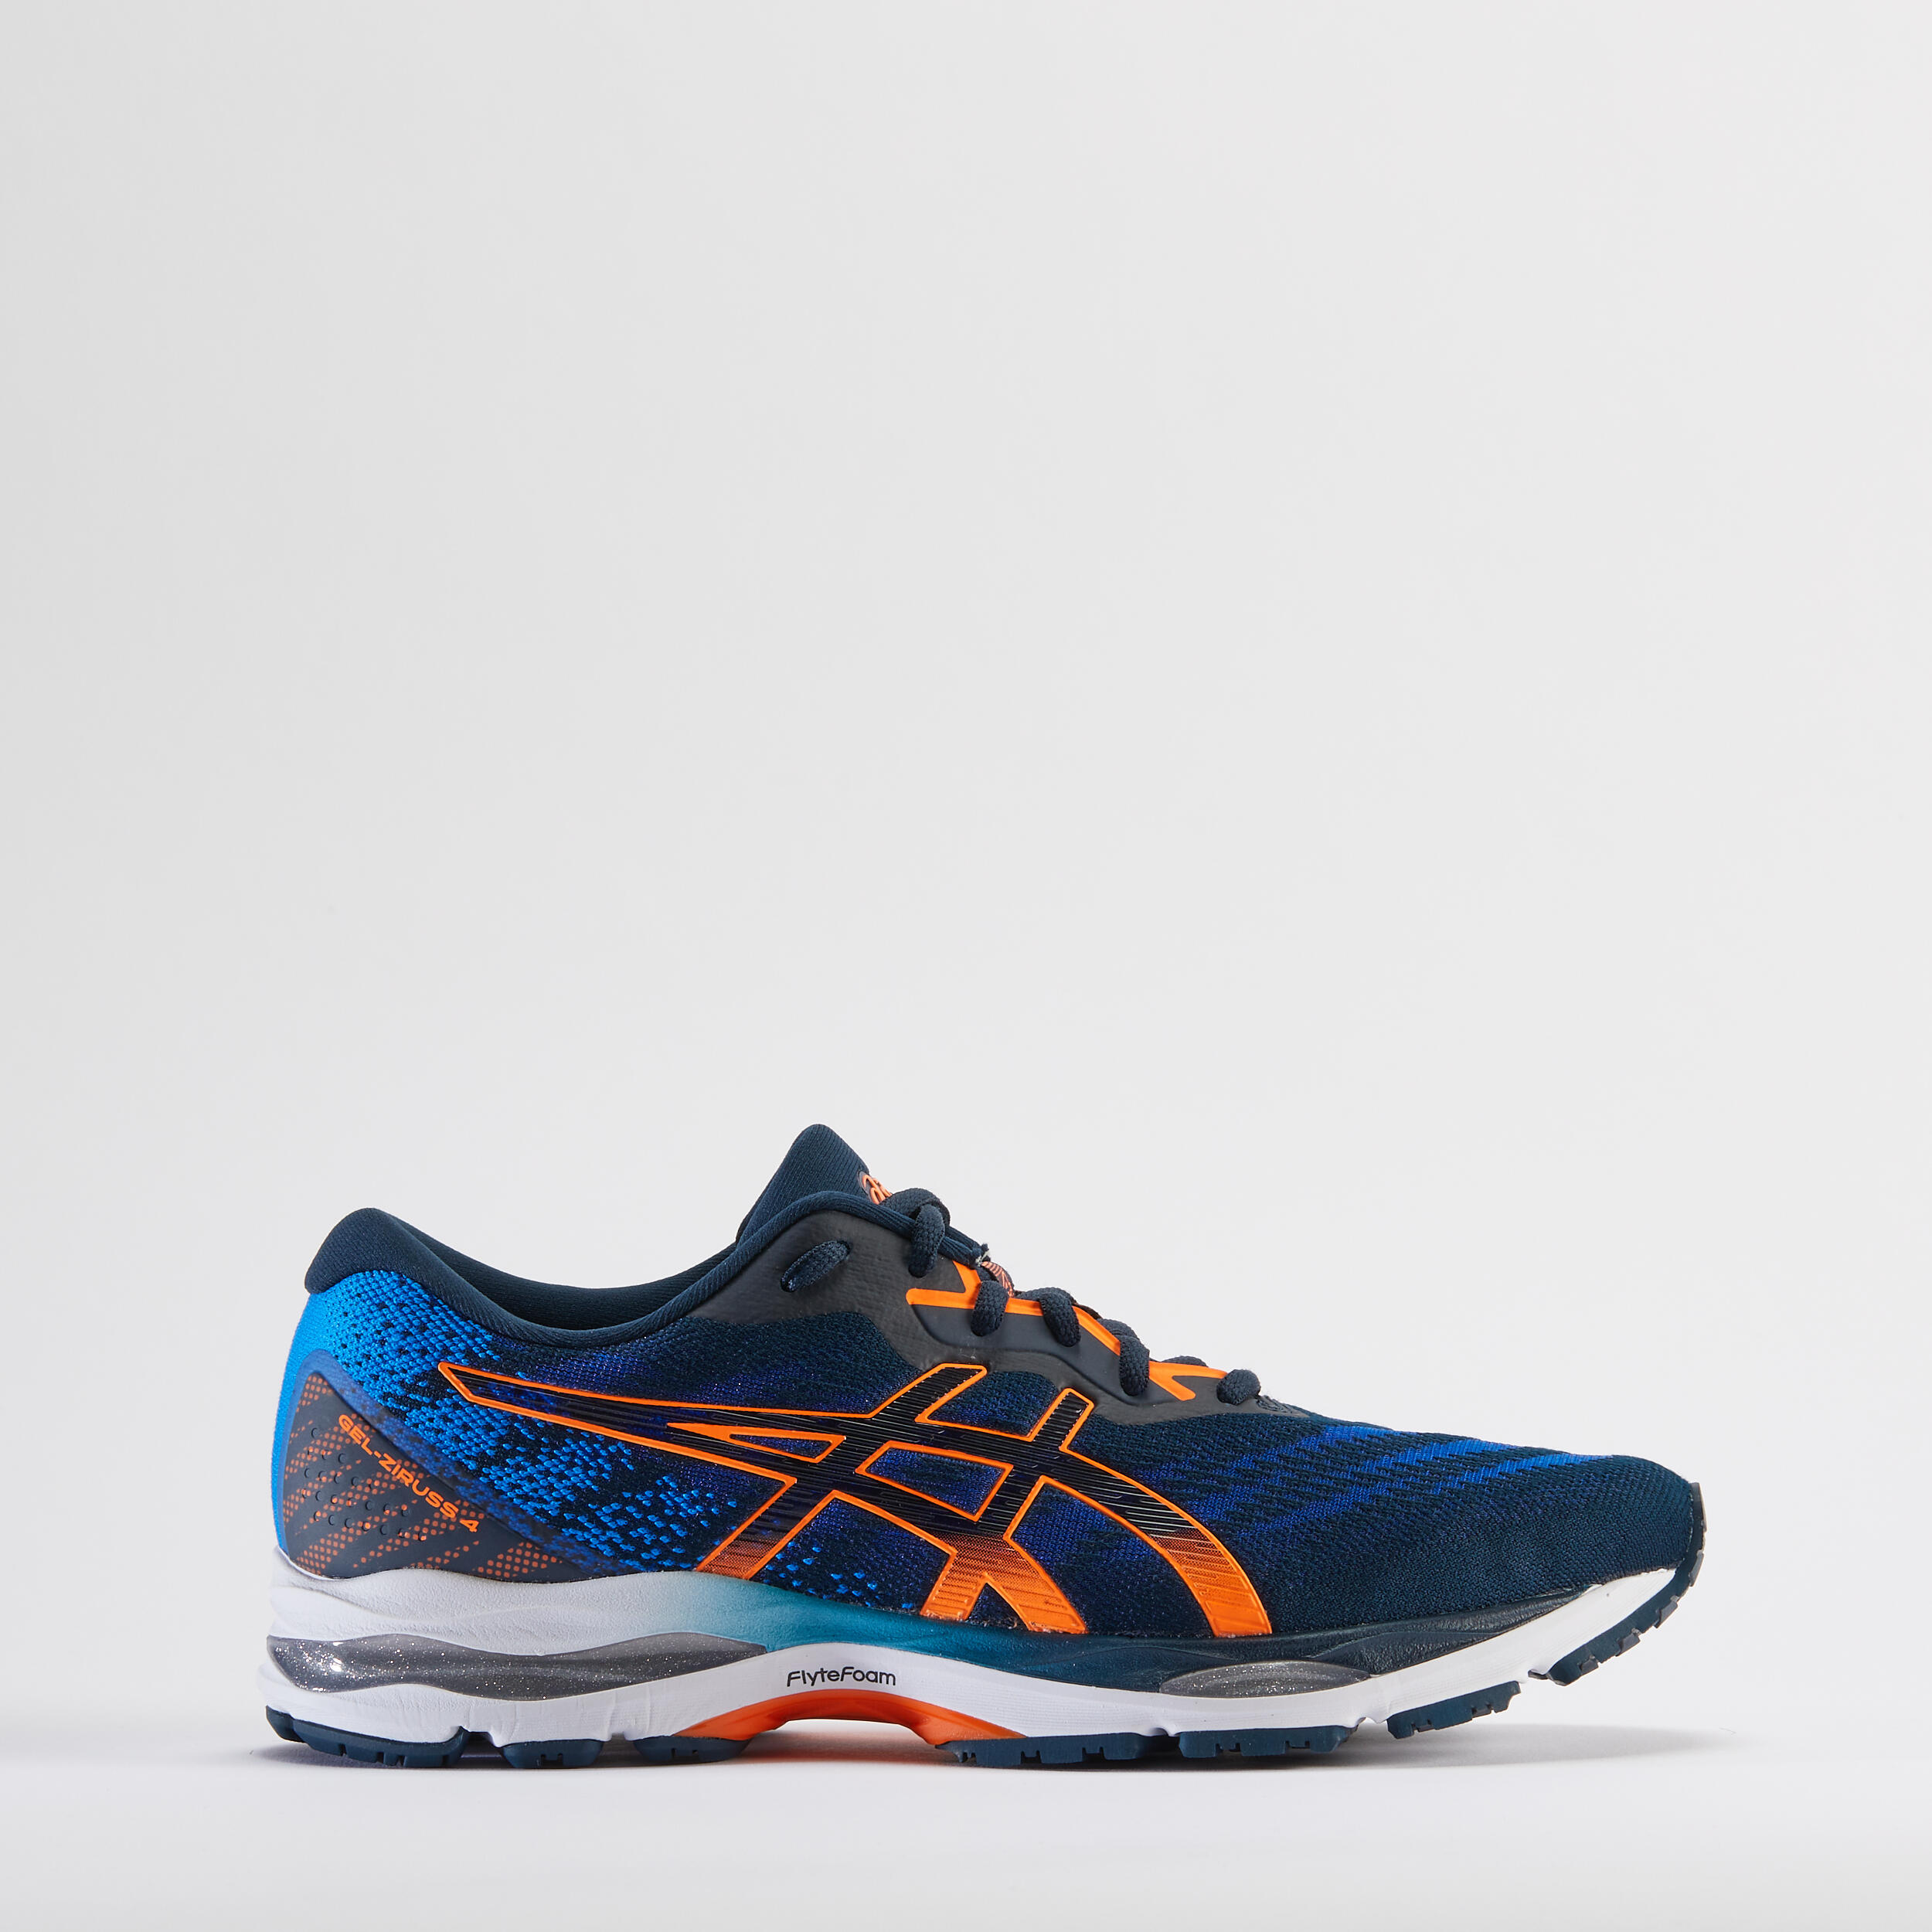 chaussure homme marque asics